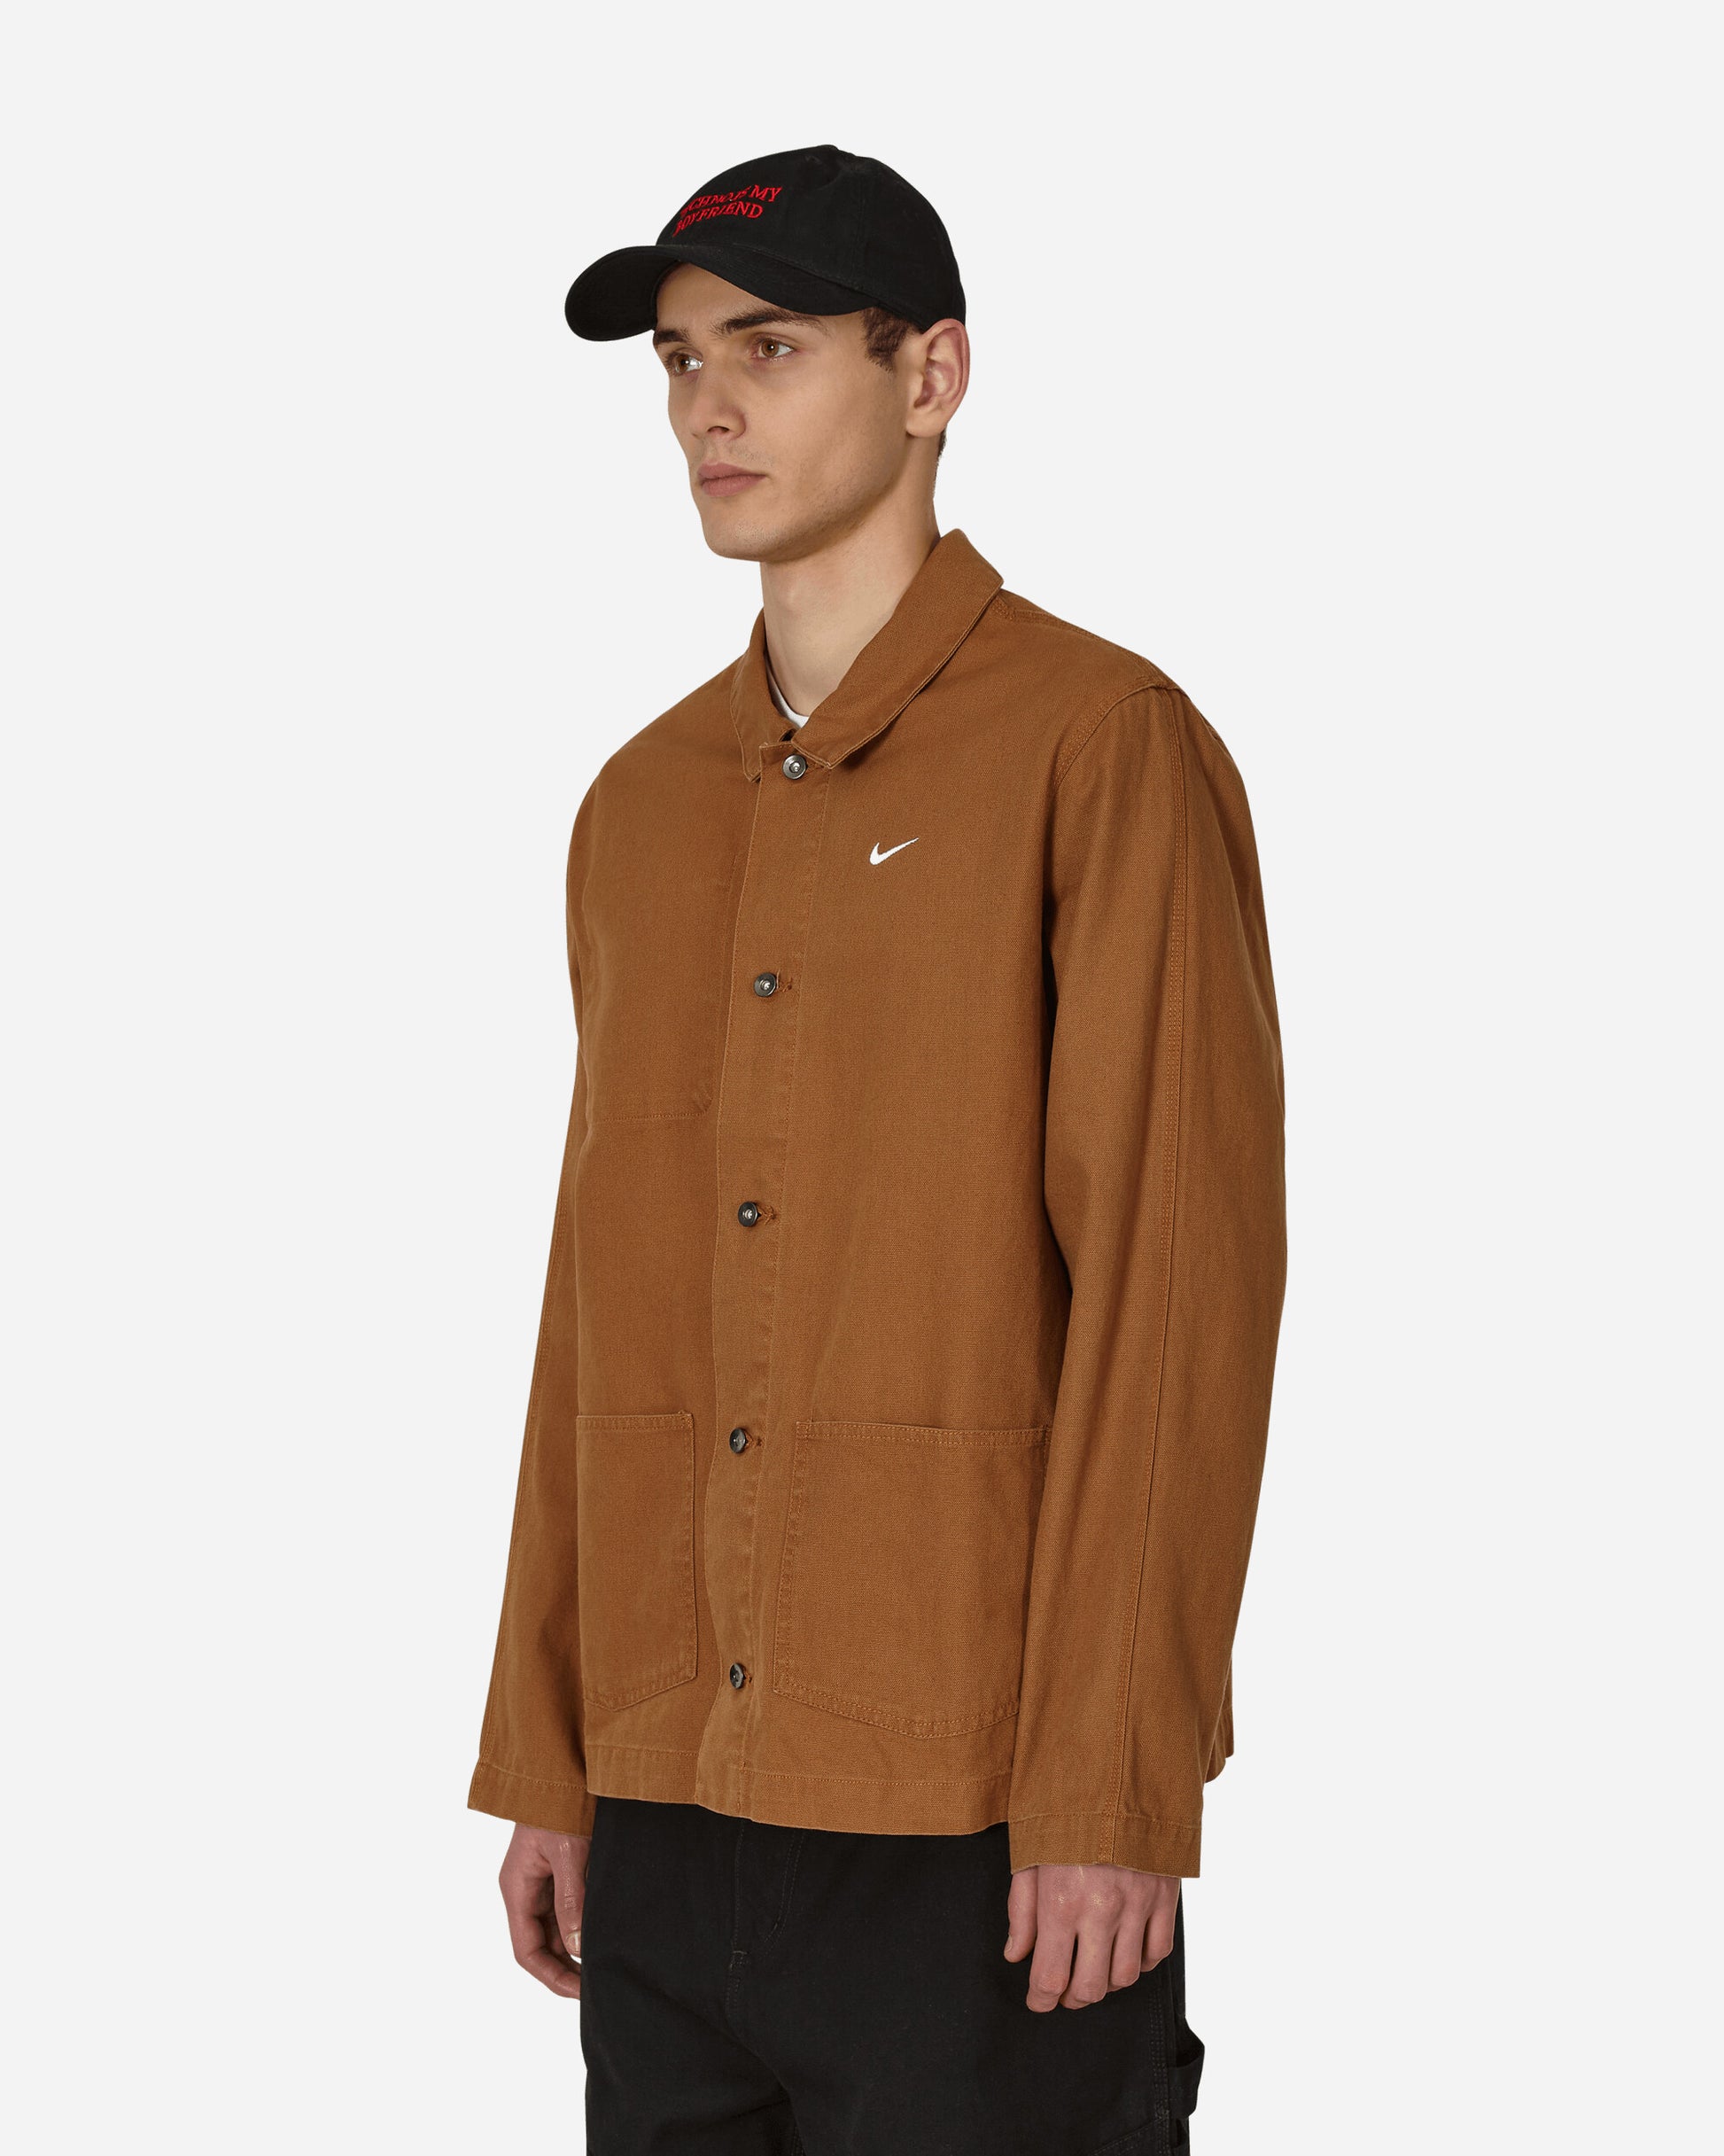 Nike Chore Coat Jkt Ul Ale Brown/White Coats and Jackets Jackets DQ5184-270